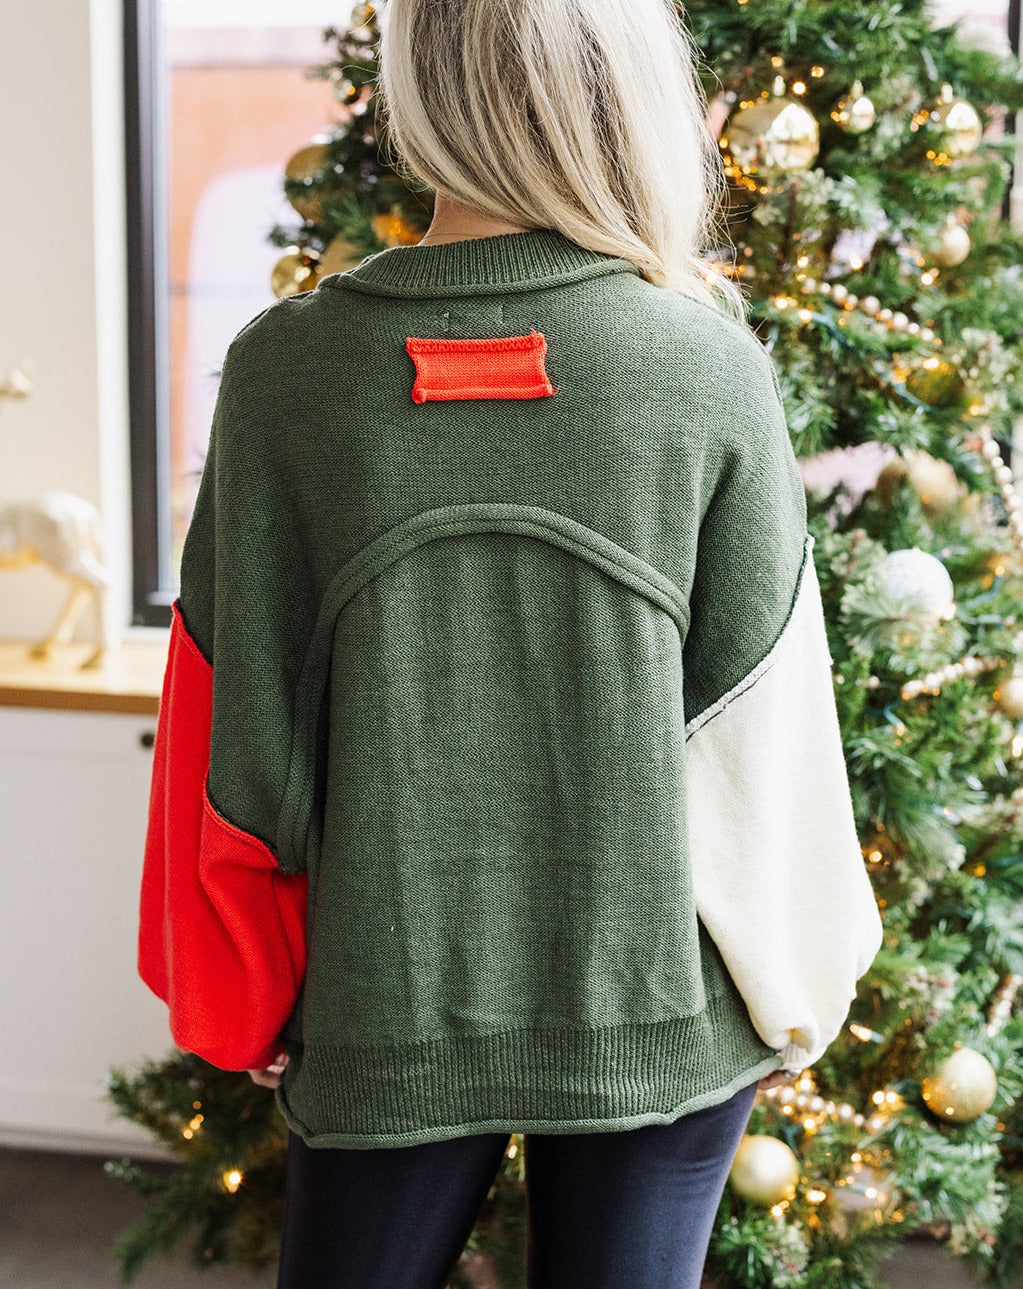 Rudolph's Red, Green, and White Colorblock Sweater